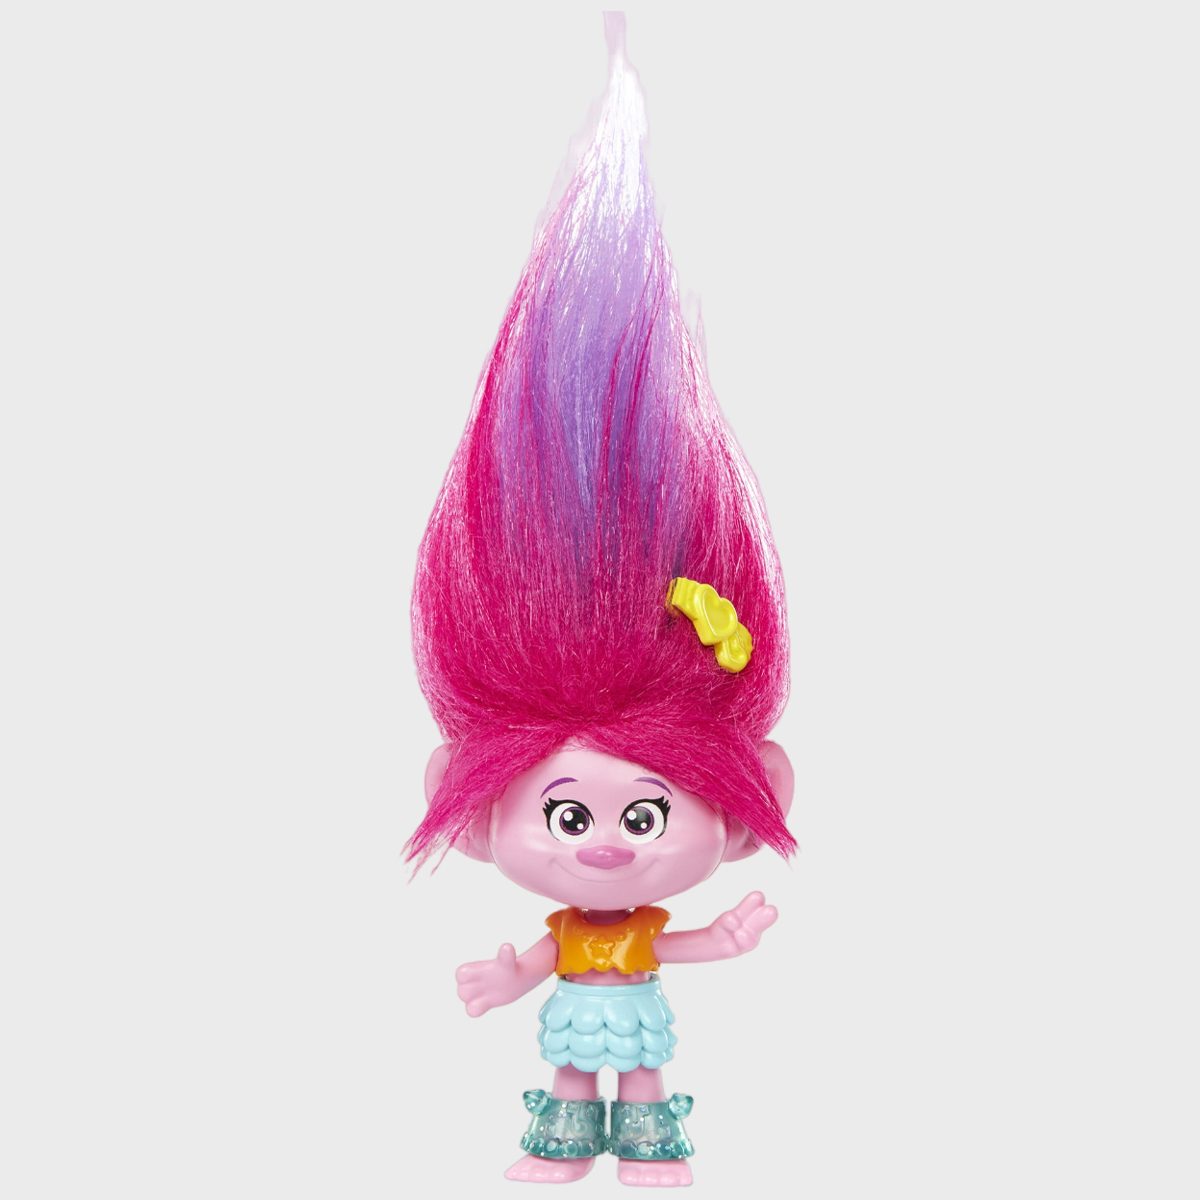 <p>Poppy, Branch and the rest of the band are coming back to the big screen this year, and we are ready to break out the cupcakes and glitter. Get your Trolls fan excited with these updated dolls. This <a href="https://www.walmart.com/ip/DreamWorks-Trolls-Band-Together-Hair-Pops-Small-Dolls-with-Removable-Clothes-3-Surprise-Accessories/2040531460" rel="noopener noreferrer">Hair Pops Poppy doll</a> features two tiny Hair Pops that can fit in her signature pink hair and pop out with just a pinch. The adorable plush Hair Pops hide a surprise inside, too, which makes them an extra <a href="https://www.rd.com/list/stocking-stuffer-ideas-for-kids/" rel="noopener noreferrer">special stocking stuffer kids will love</a>.</p> <p class="listicle-page__cta-button-shop"><a class="shop-btn" href="https://www.walmart.com/ip/DreamWorks-Trolls-Band-Together-Hair-Pops-Small-Dolls-with-Removable-Clothes-3-Surprise-Accessories/2040531460">Shop Now</a></p>